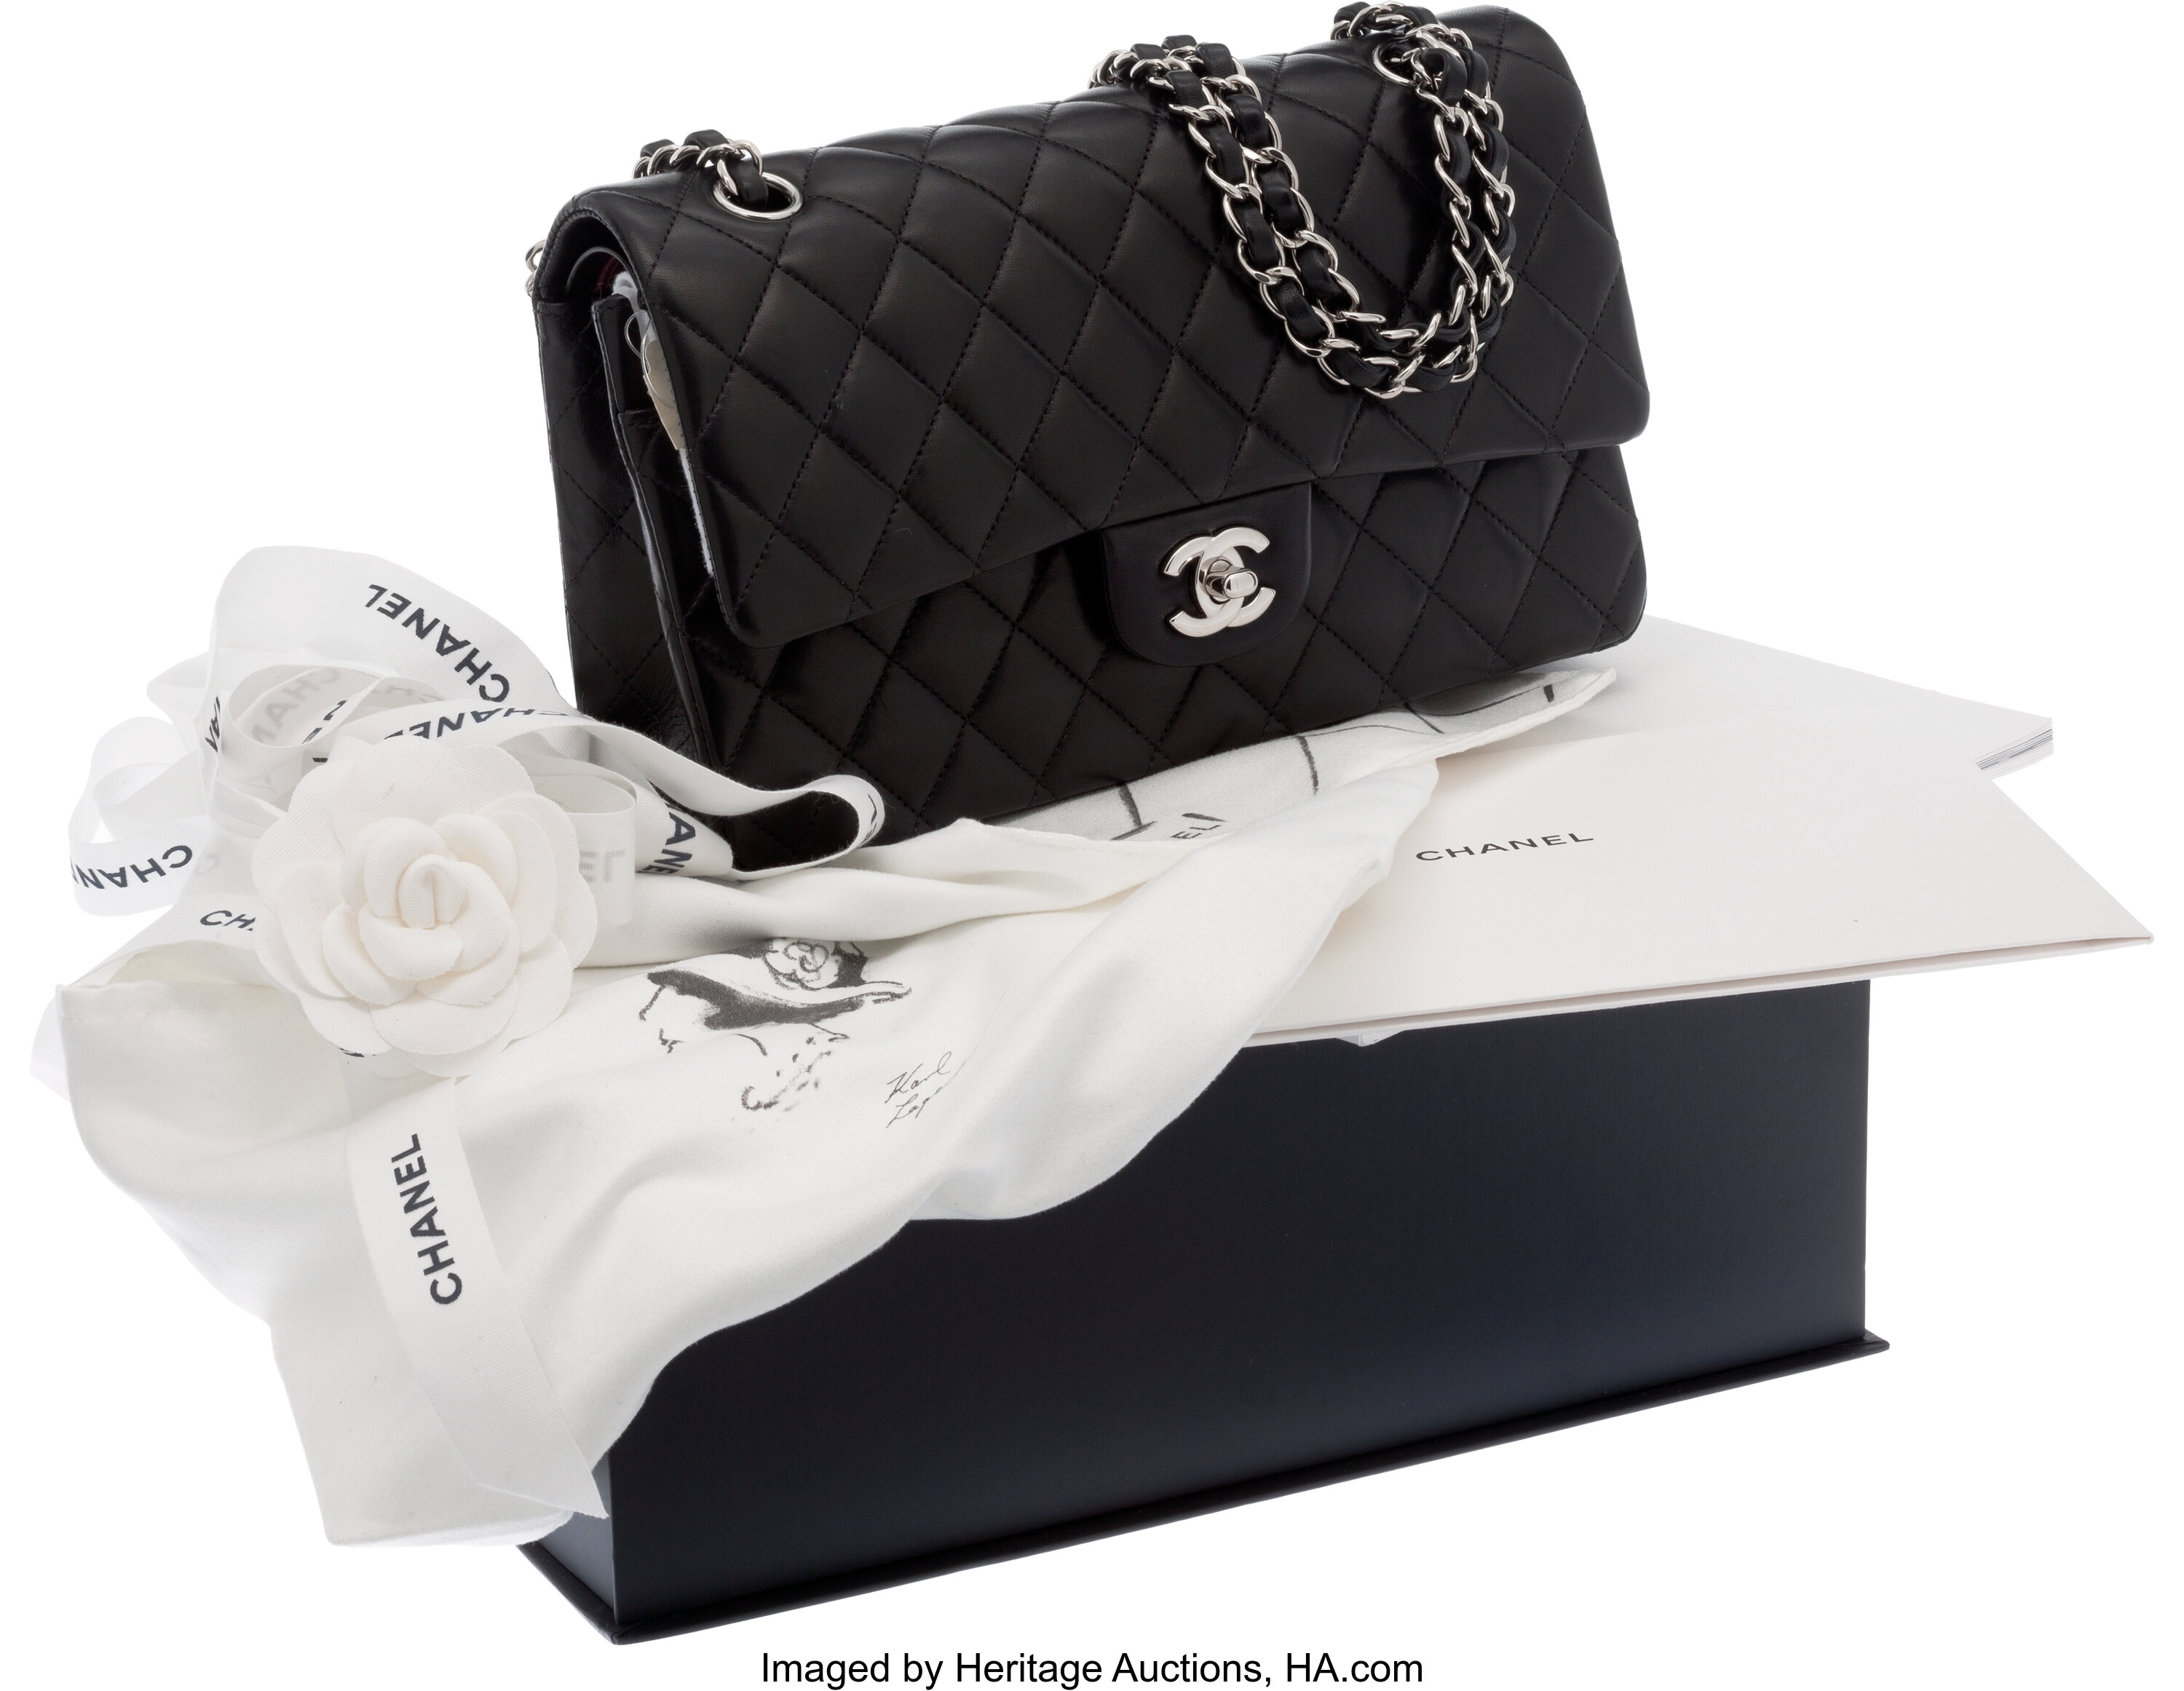 Chanel 2012 Bergdorf Goodman Special Edition Black Lambskin Leather | Lot  #56228 | Heritage Auctions